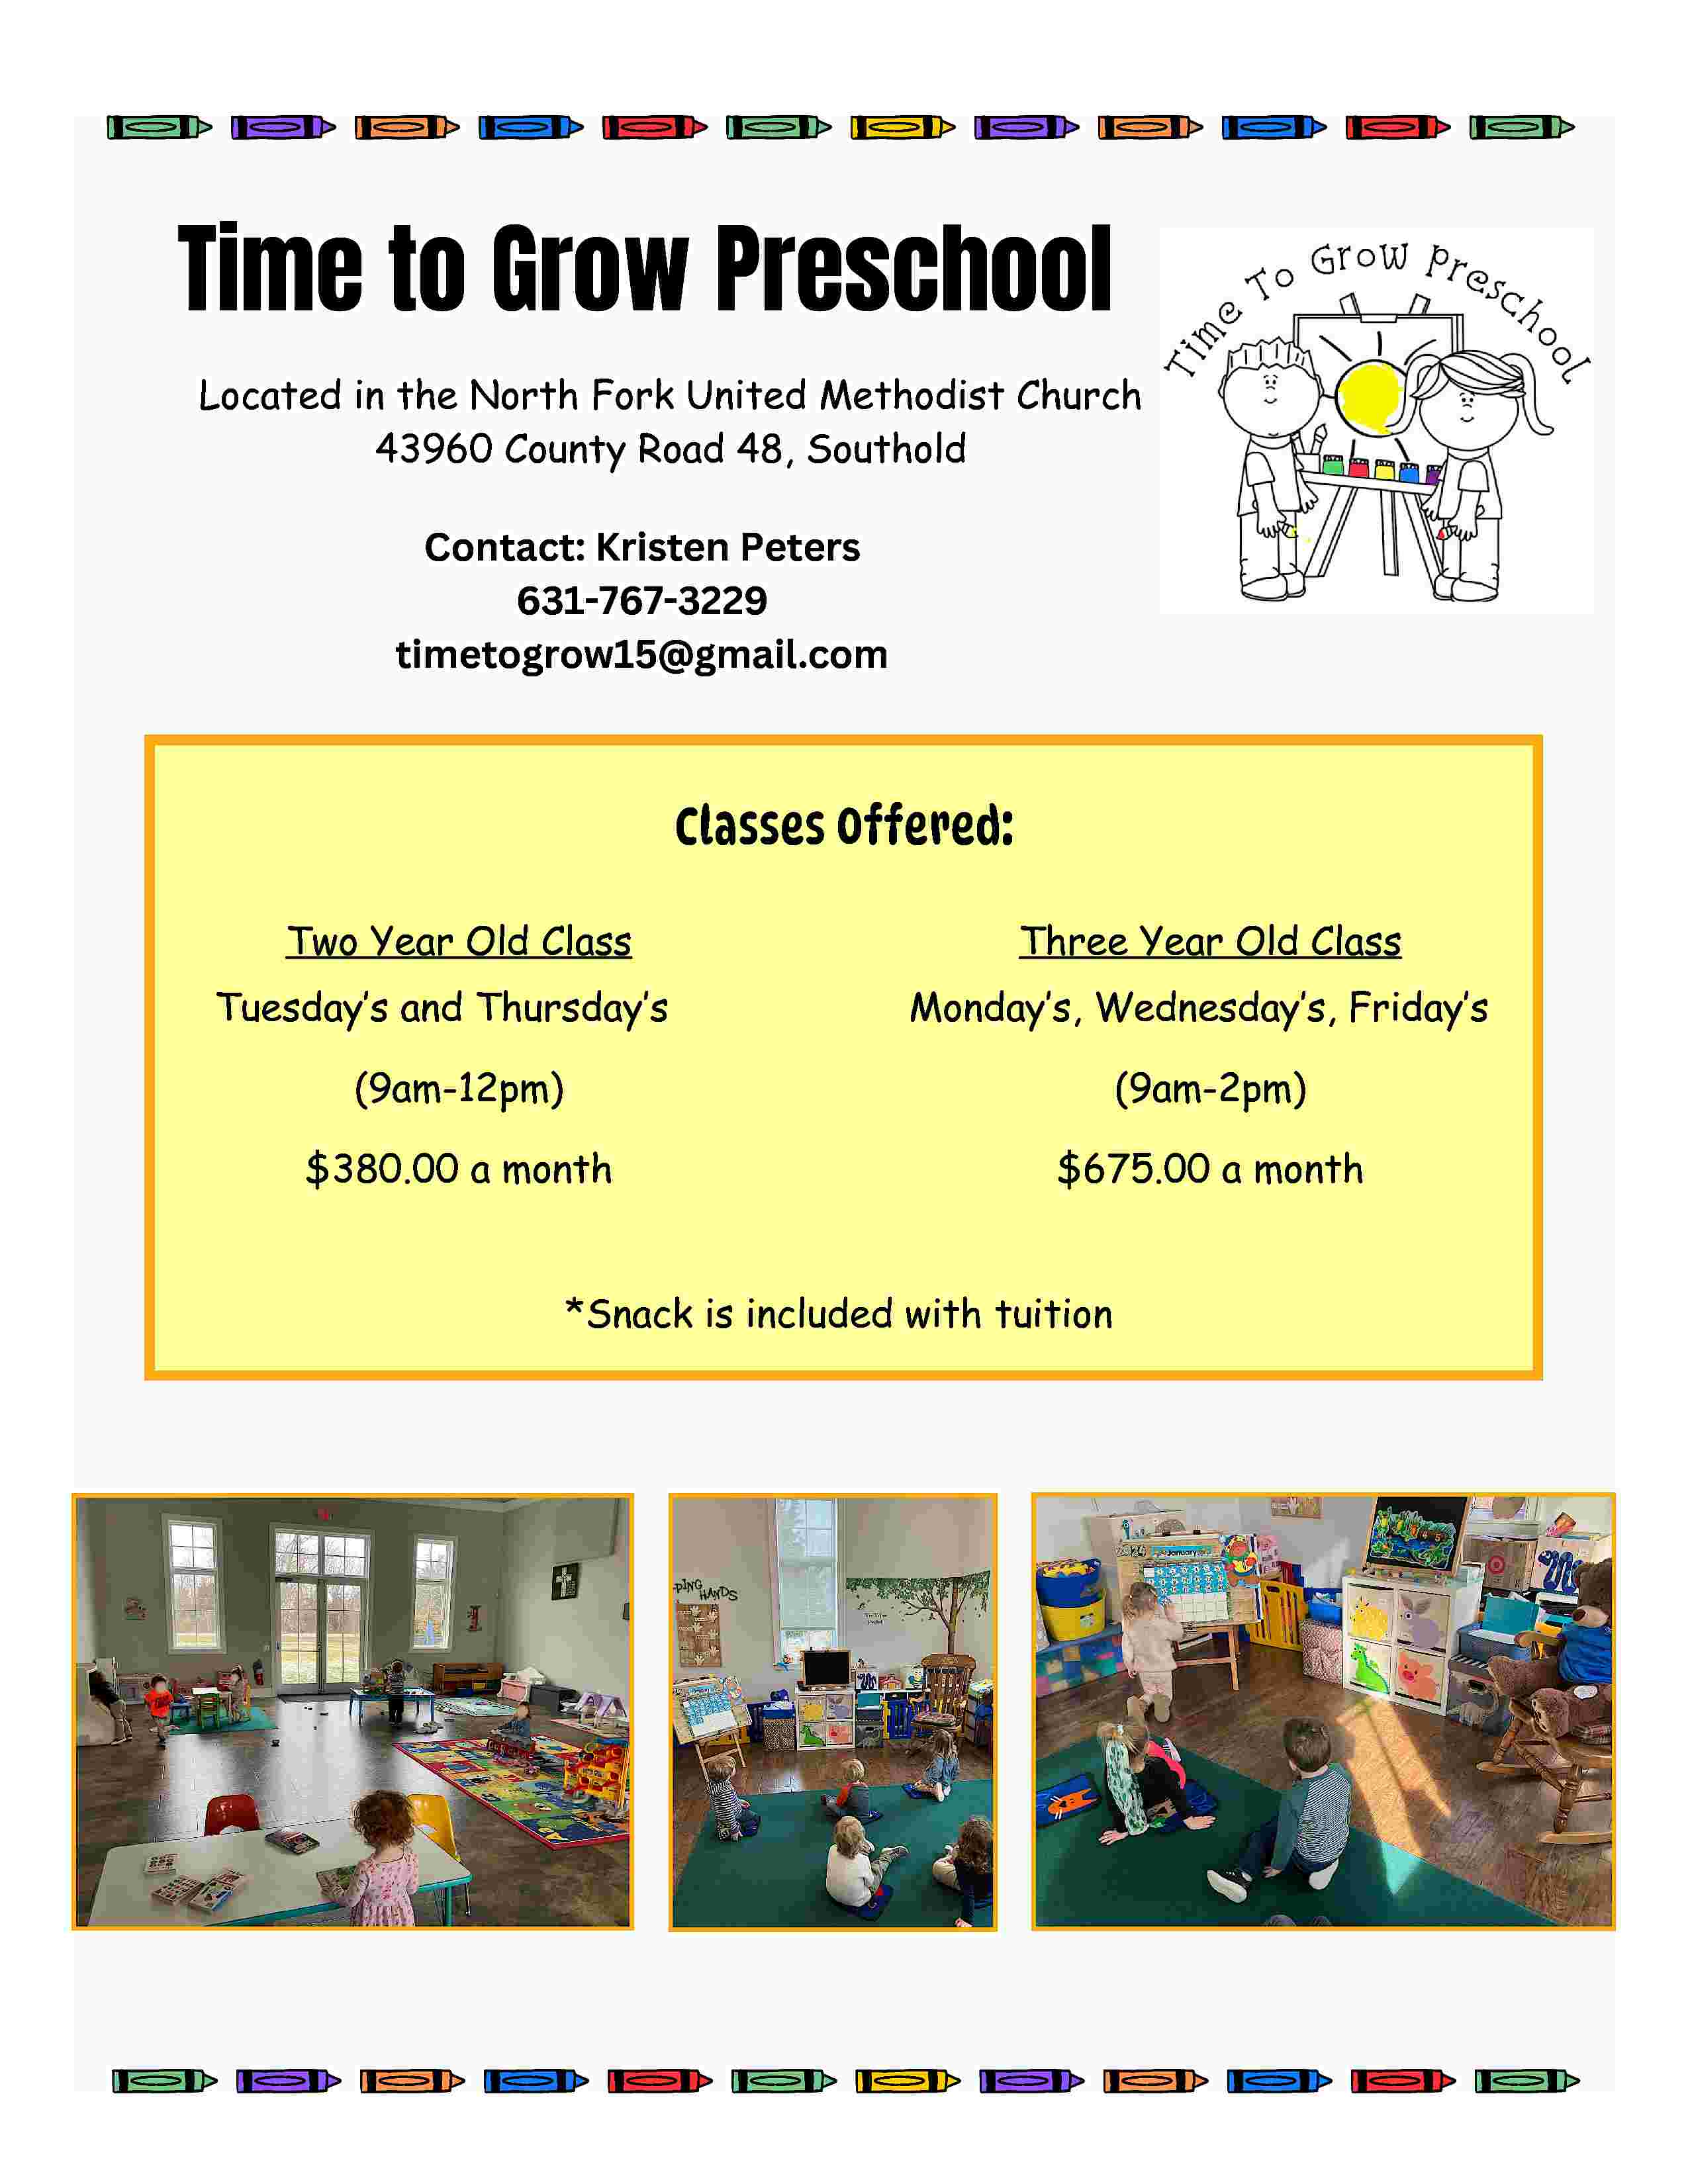 Time to Grow Preschool <br>Located  Time to Grow Preschool  Located in the North Fork United Methodist Church  43960 County Road 48, Southold  Contact: Kristen Peters  631-767-3229  timetogrow15@gmail.com    Classes Offered:  Two Year Old Class  Tuesday   s and Thursday   s    Three Year Old Class  Monday   s, Wednesday   s, Friday   s    (9am-12pm)    (9am-2pm)    $380.00 a month    $675.00 a month    *Snack is included with tuition     